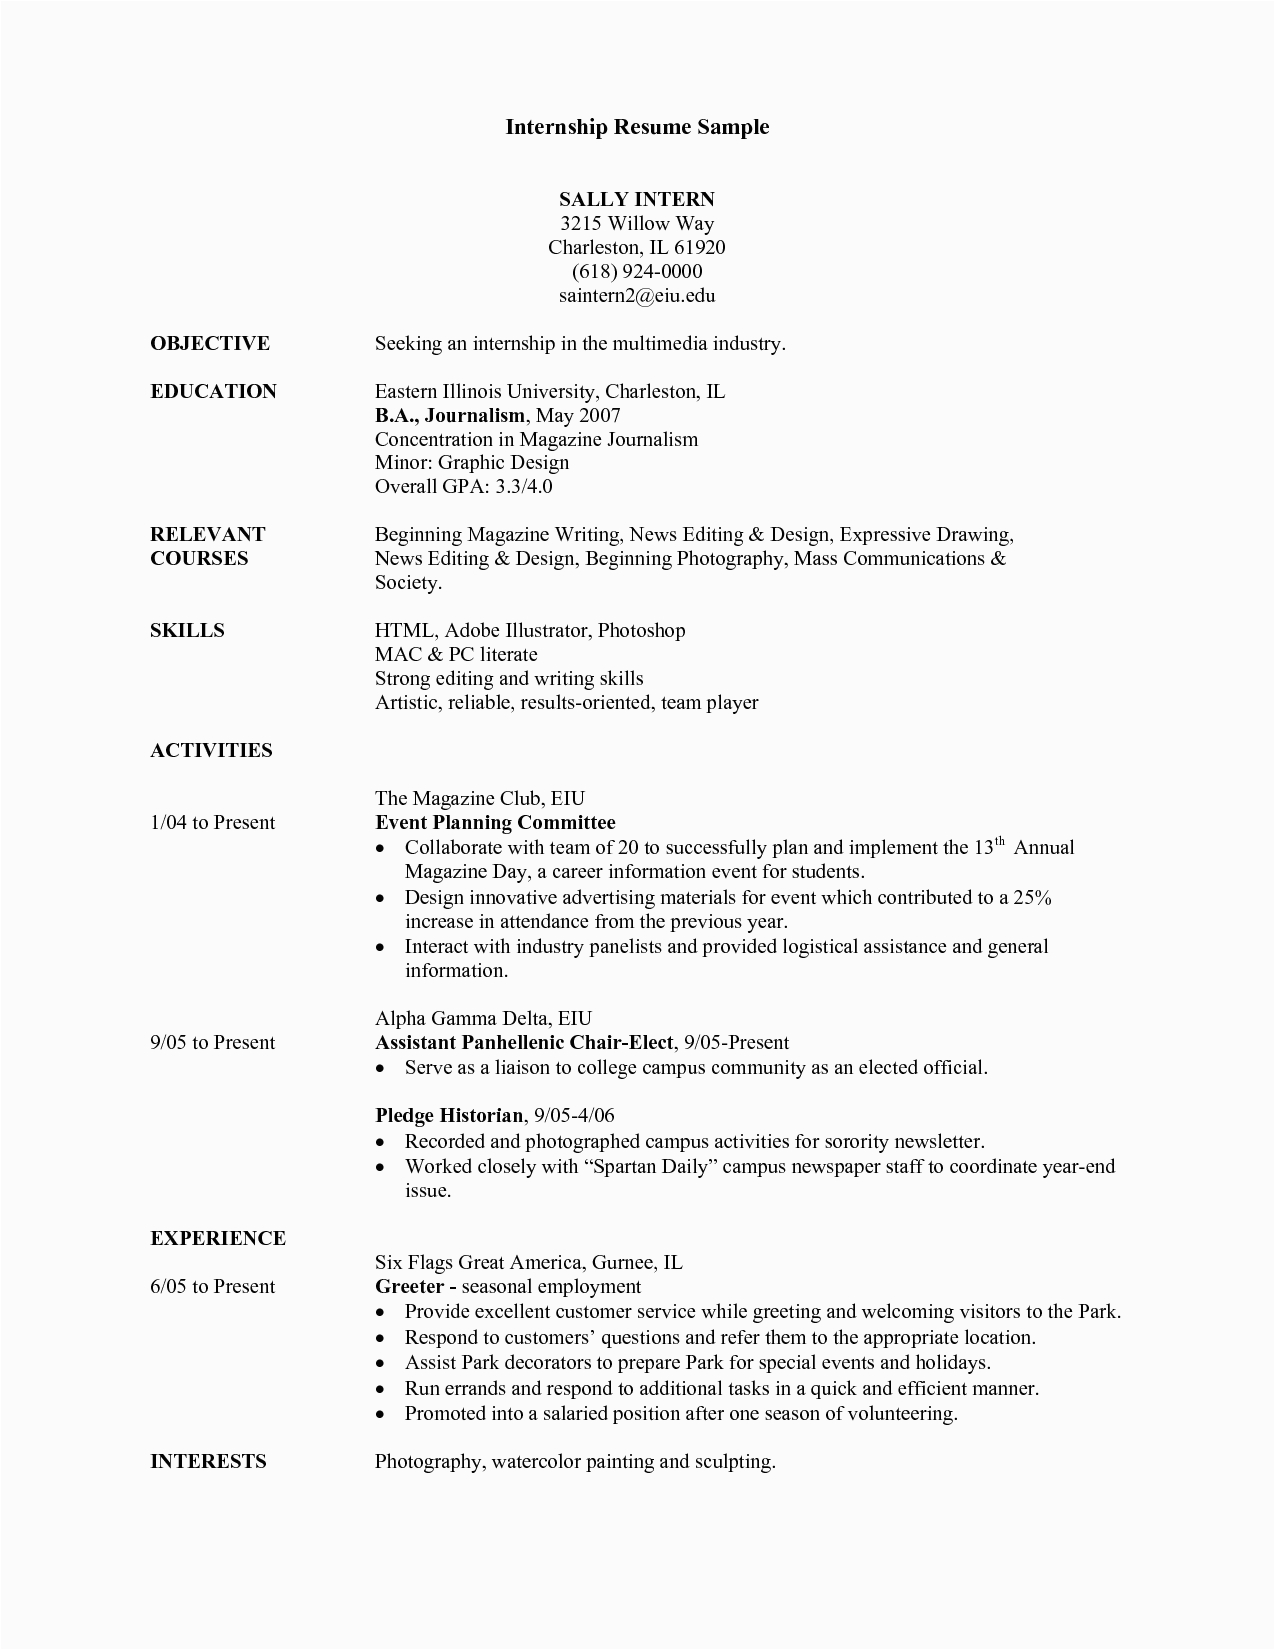 Internship Resume Sample for College Students Pdf Student Resume for Internship Database Letter Templates